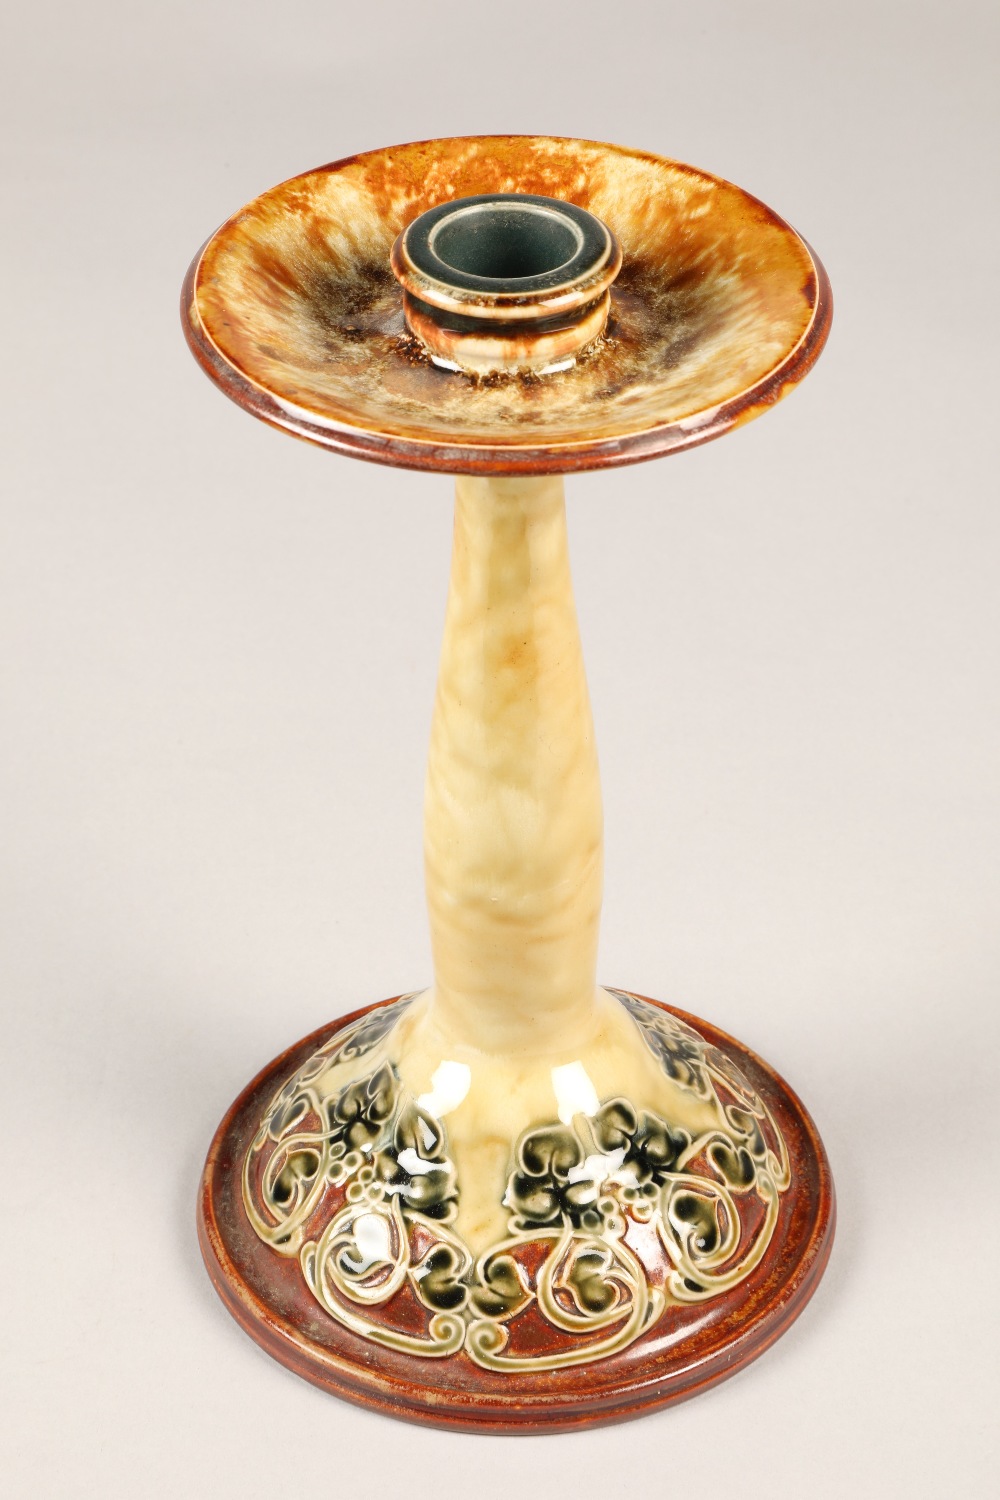 Pair of Doulton Lambeth aesthetic movement candlesticks in the liberty style, 23cm high (2) - Image 3 of 4